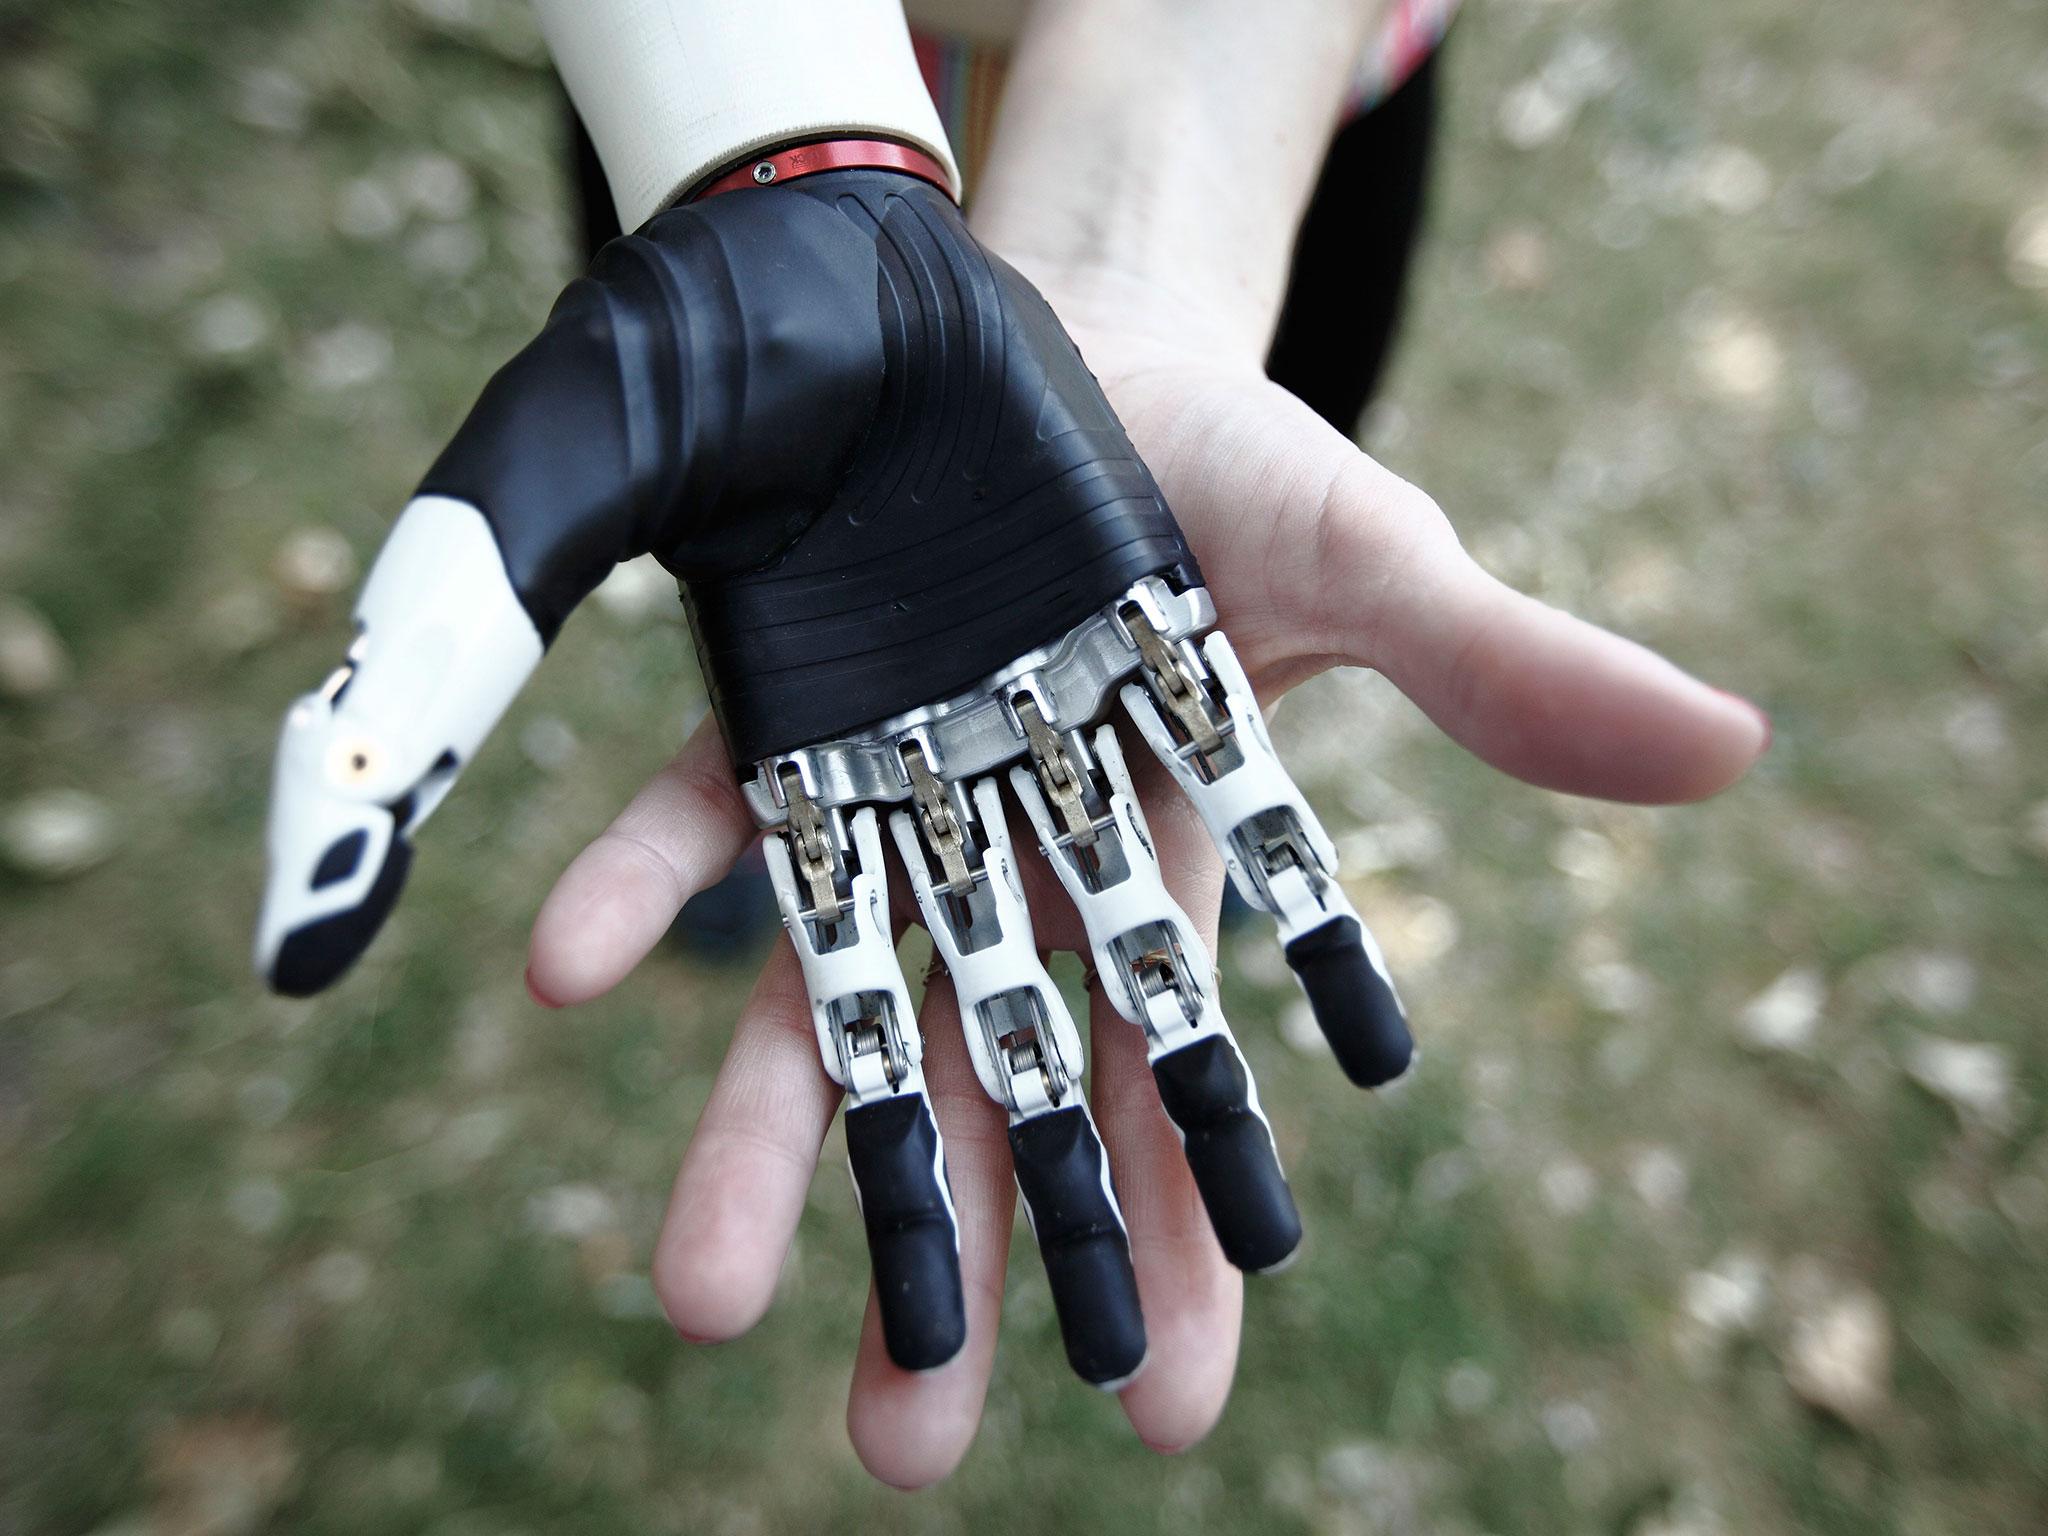 &#13;
Sensors in the bebionic arm allow it to move when the wearer contracts their muscles. &#13;